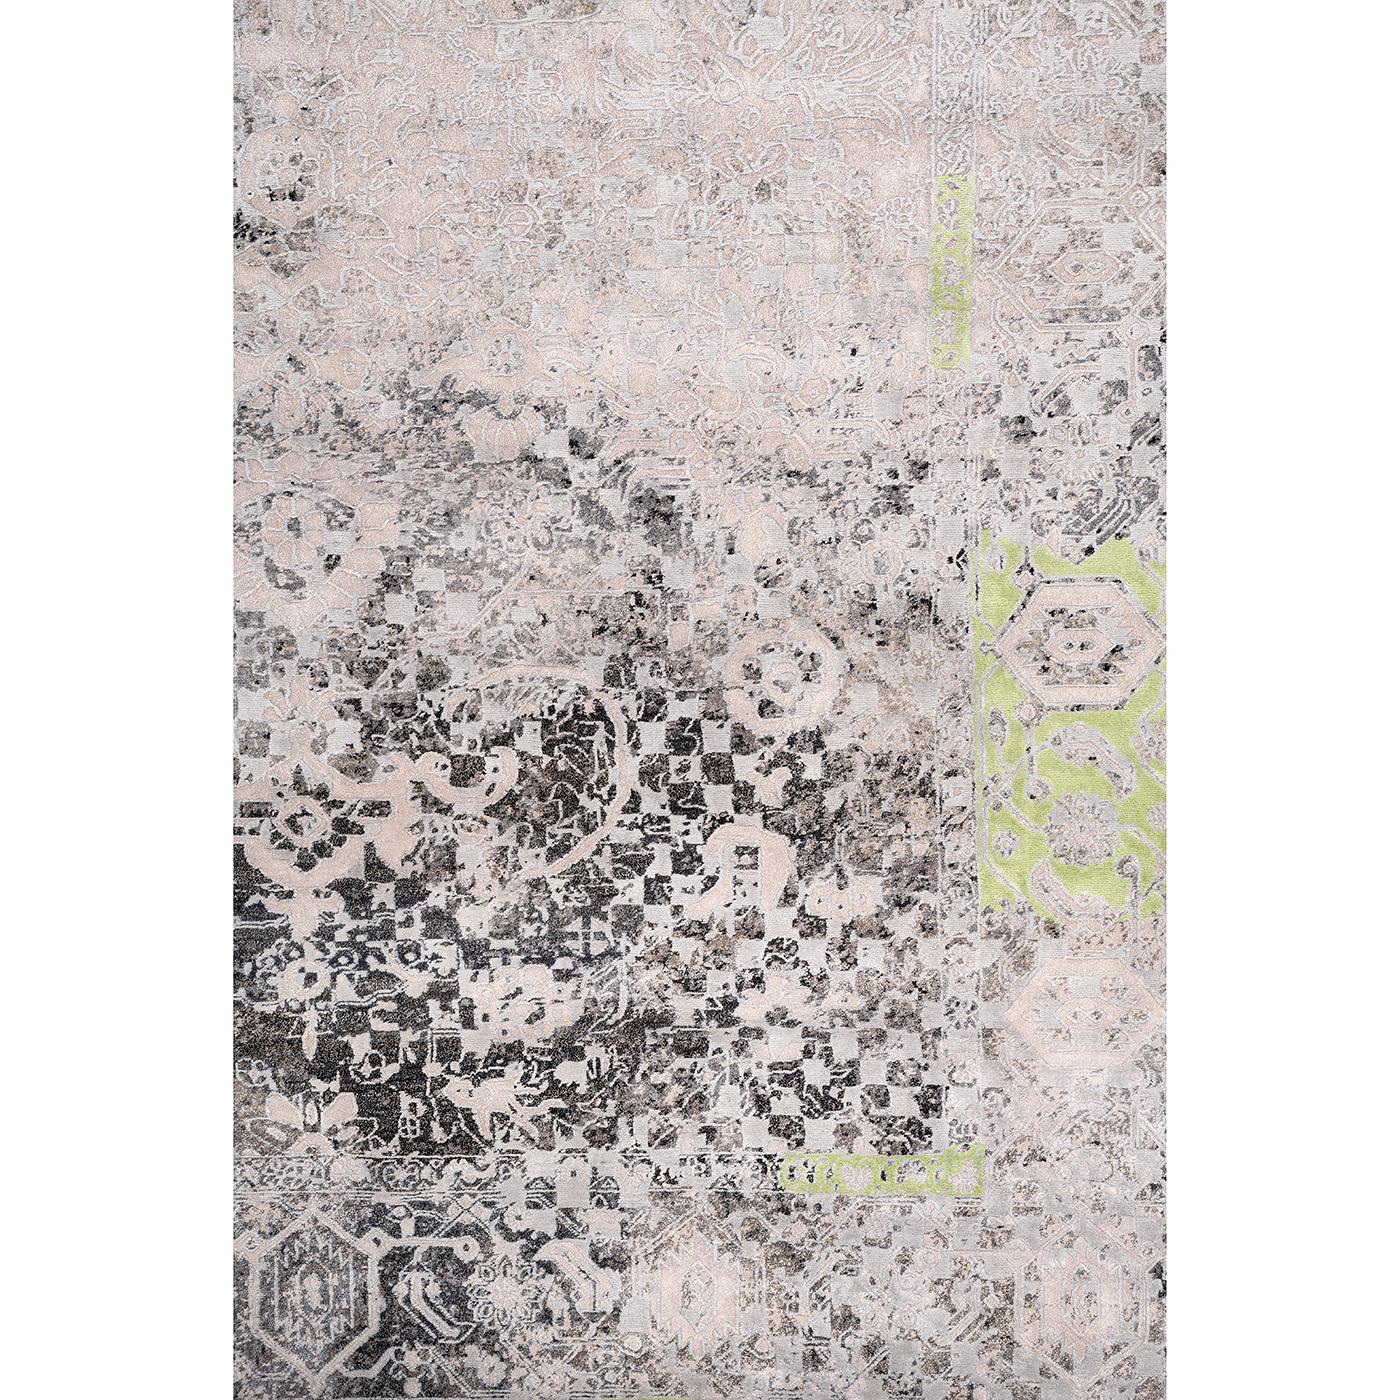 Handwoven in India by skillful artisans, this elegant rug in pure Chinese silk, nettle, features a delicate, geometric pattern in light gray color with shimmering shades of light green to create depth and graphic intrique. The textured design is